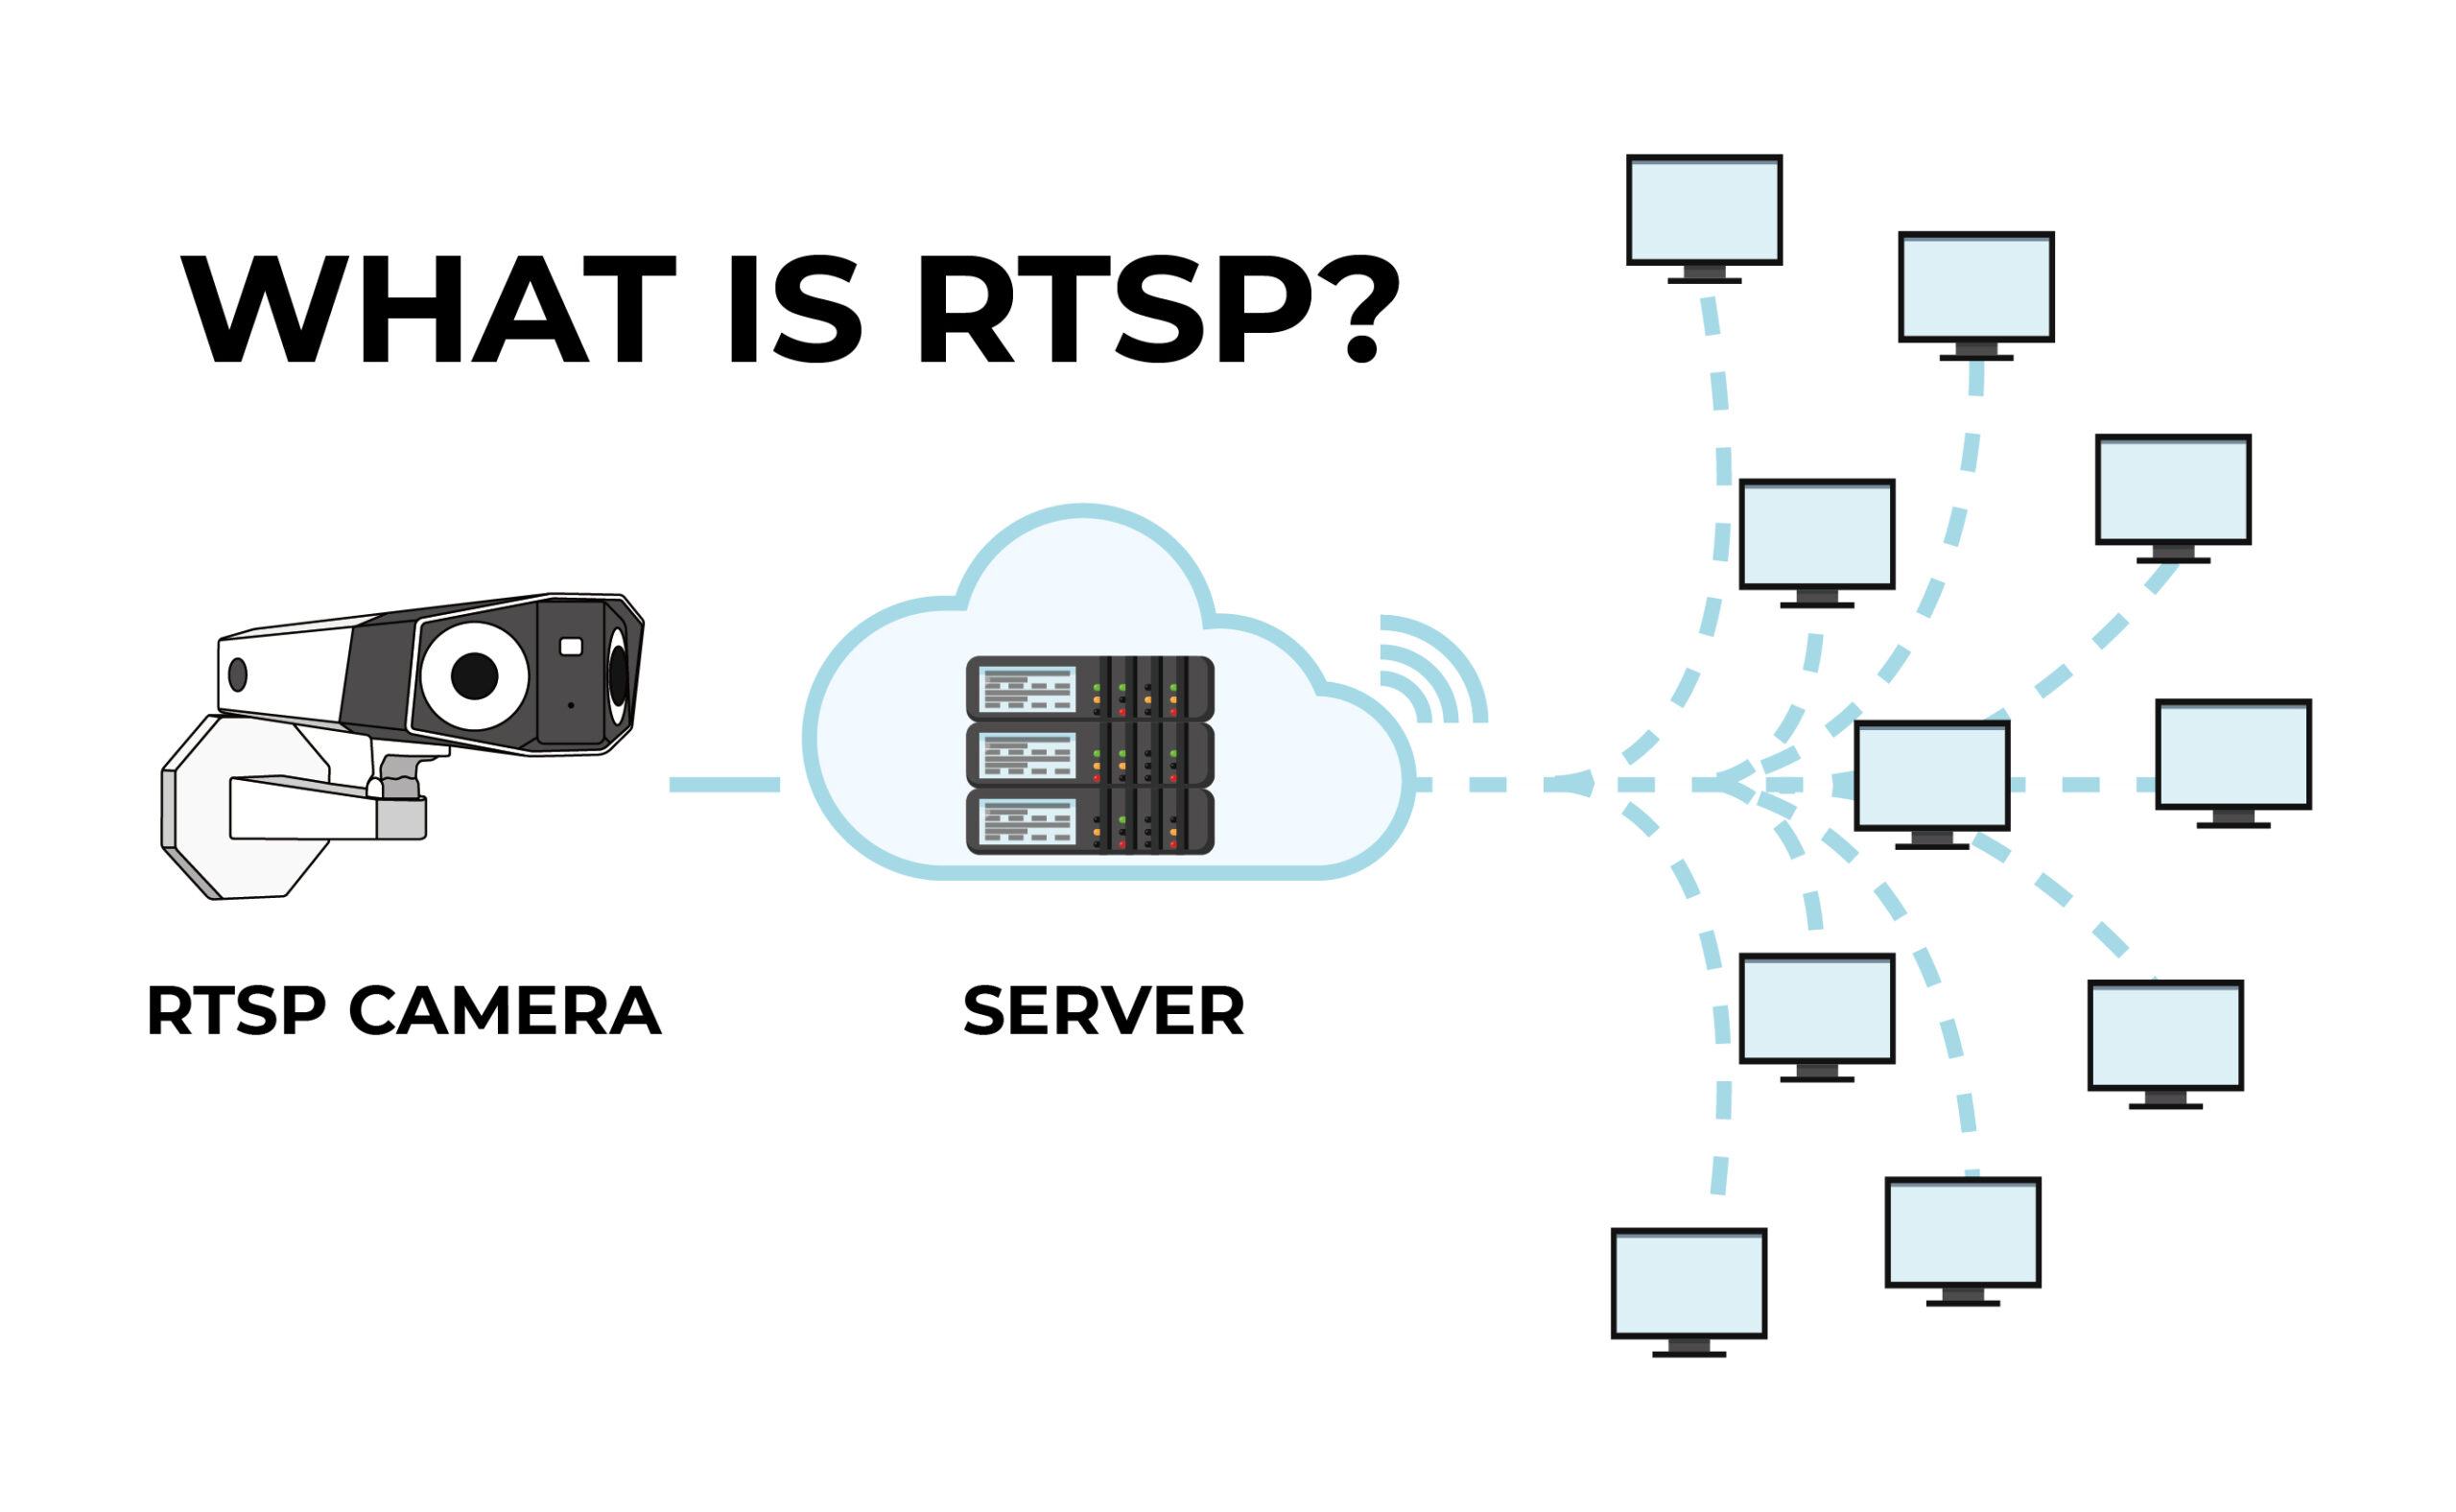 12: An example of an RTSP session between a client and a server. Both